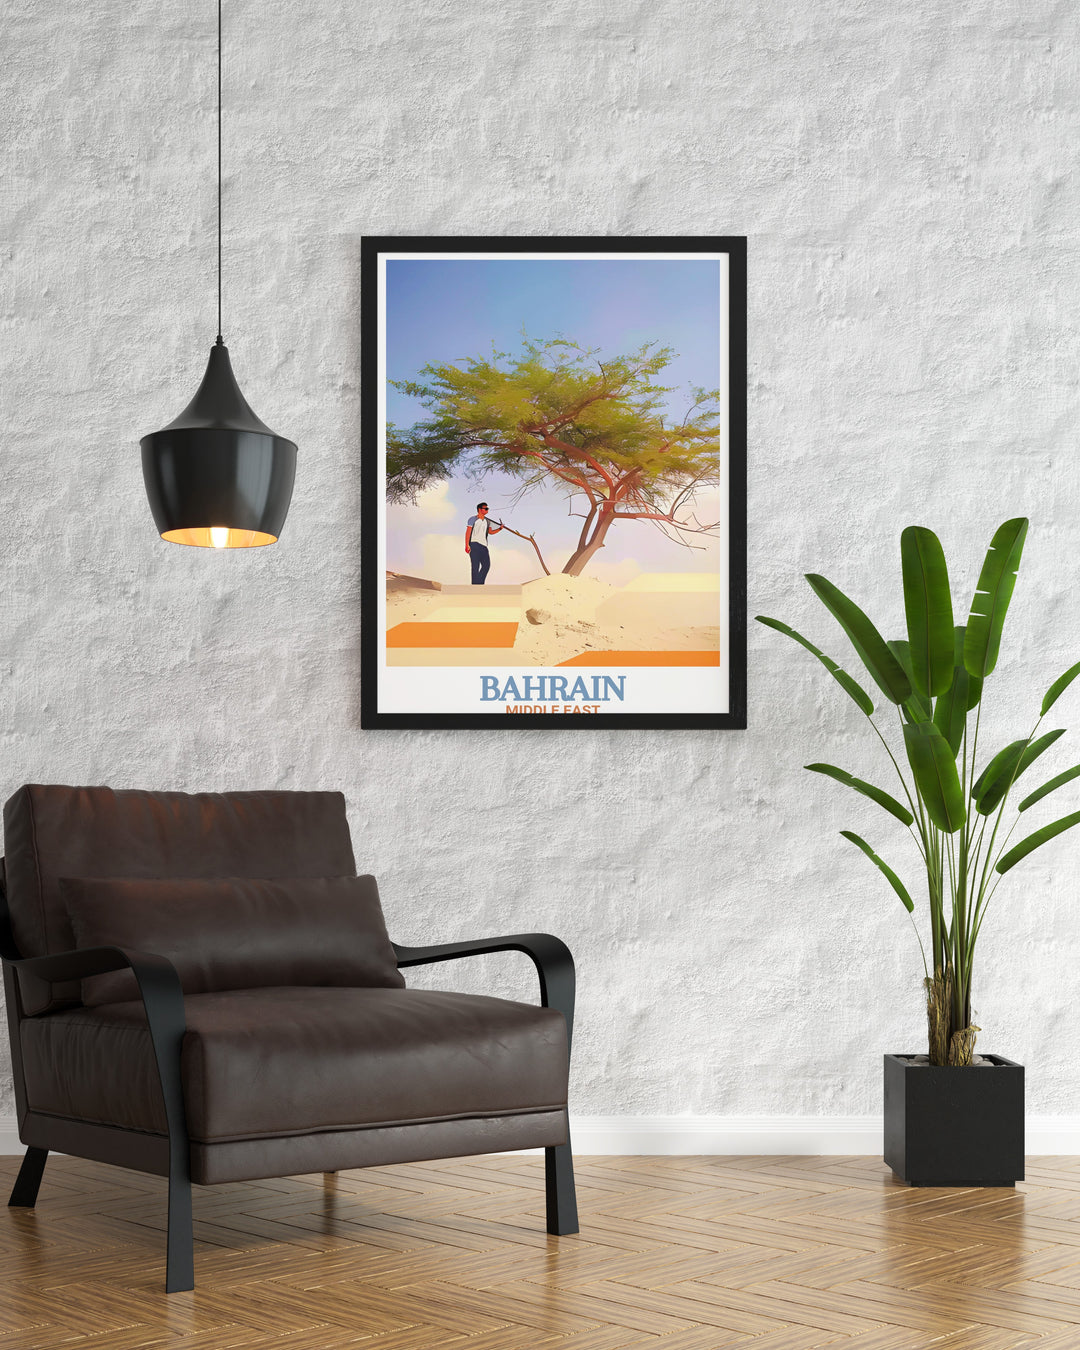 Bahrain Travel Art featuring the iconic Tree of Life a perfect addition to any home decor celebrating the resilience and beauty of nature in Bahrain.